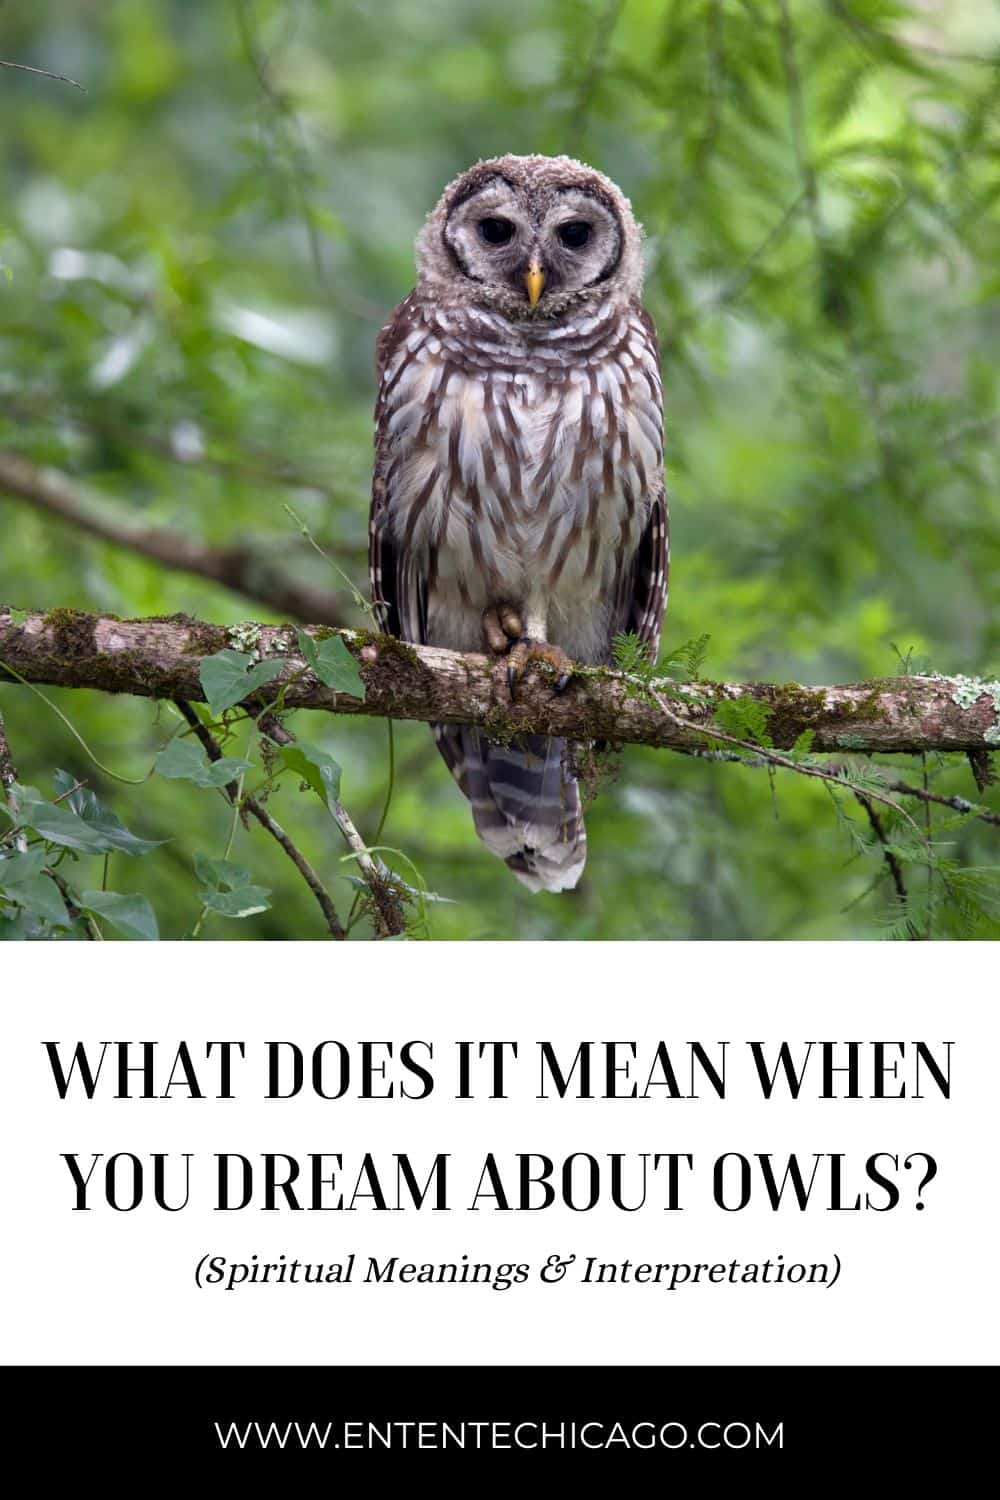 What Does It Mean to Dream About Owls